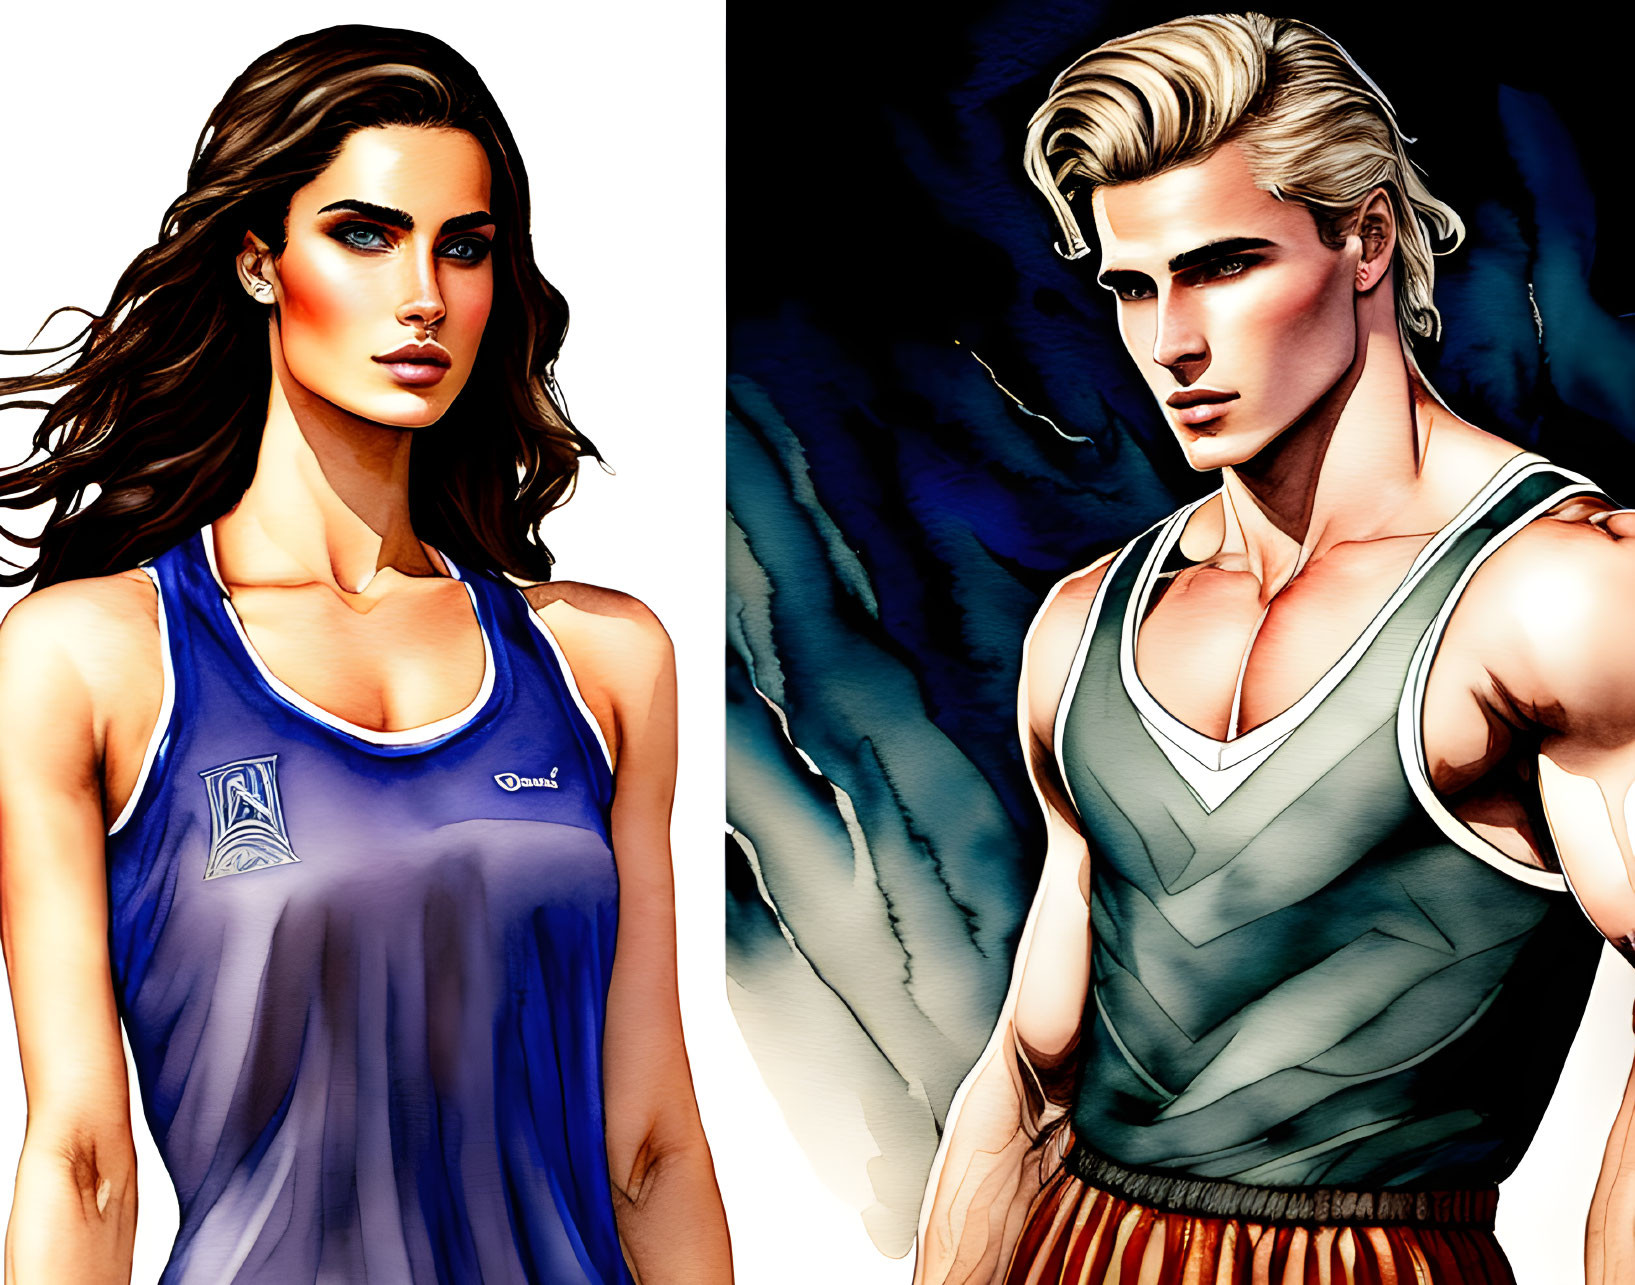 Animated characters: woman in blue tank top and man in green vest against dramatic shaded backdrop